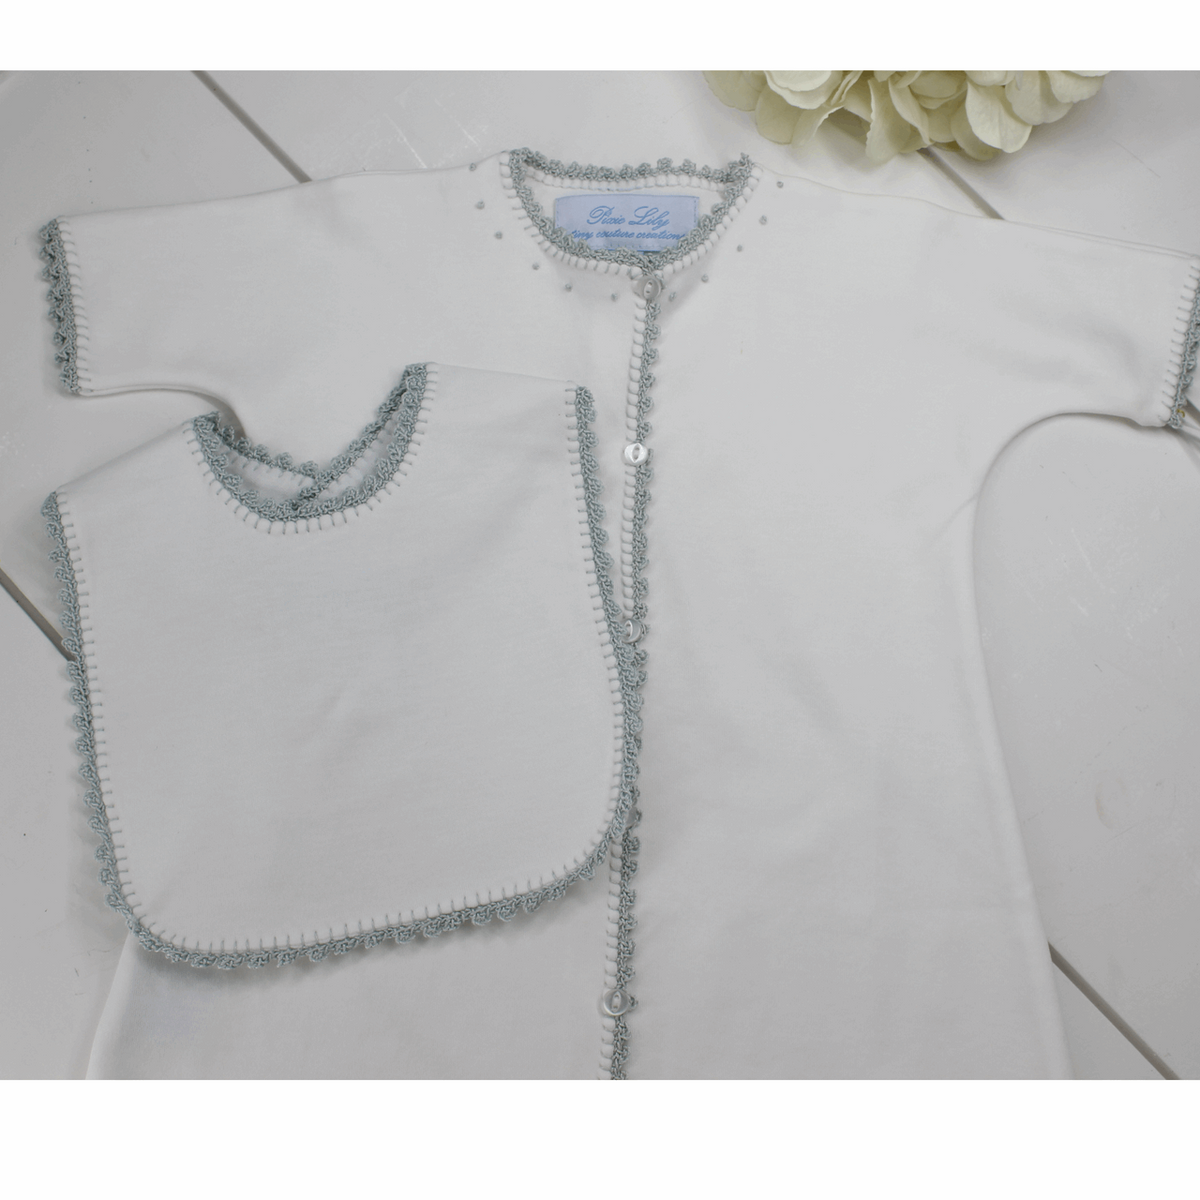 Baby Boy Daygown Coming Home Outfit White Blue Crochet Trim